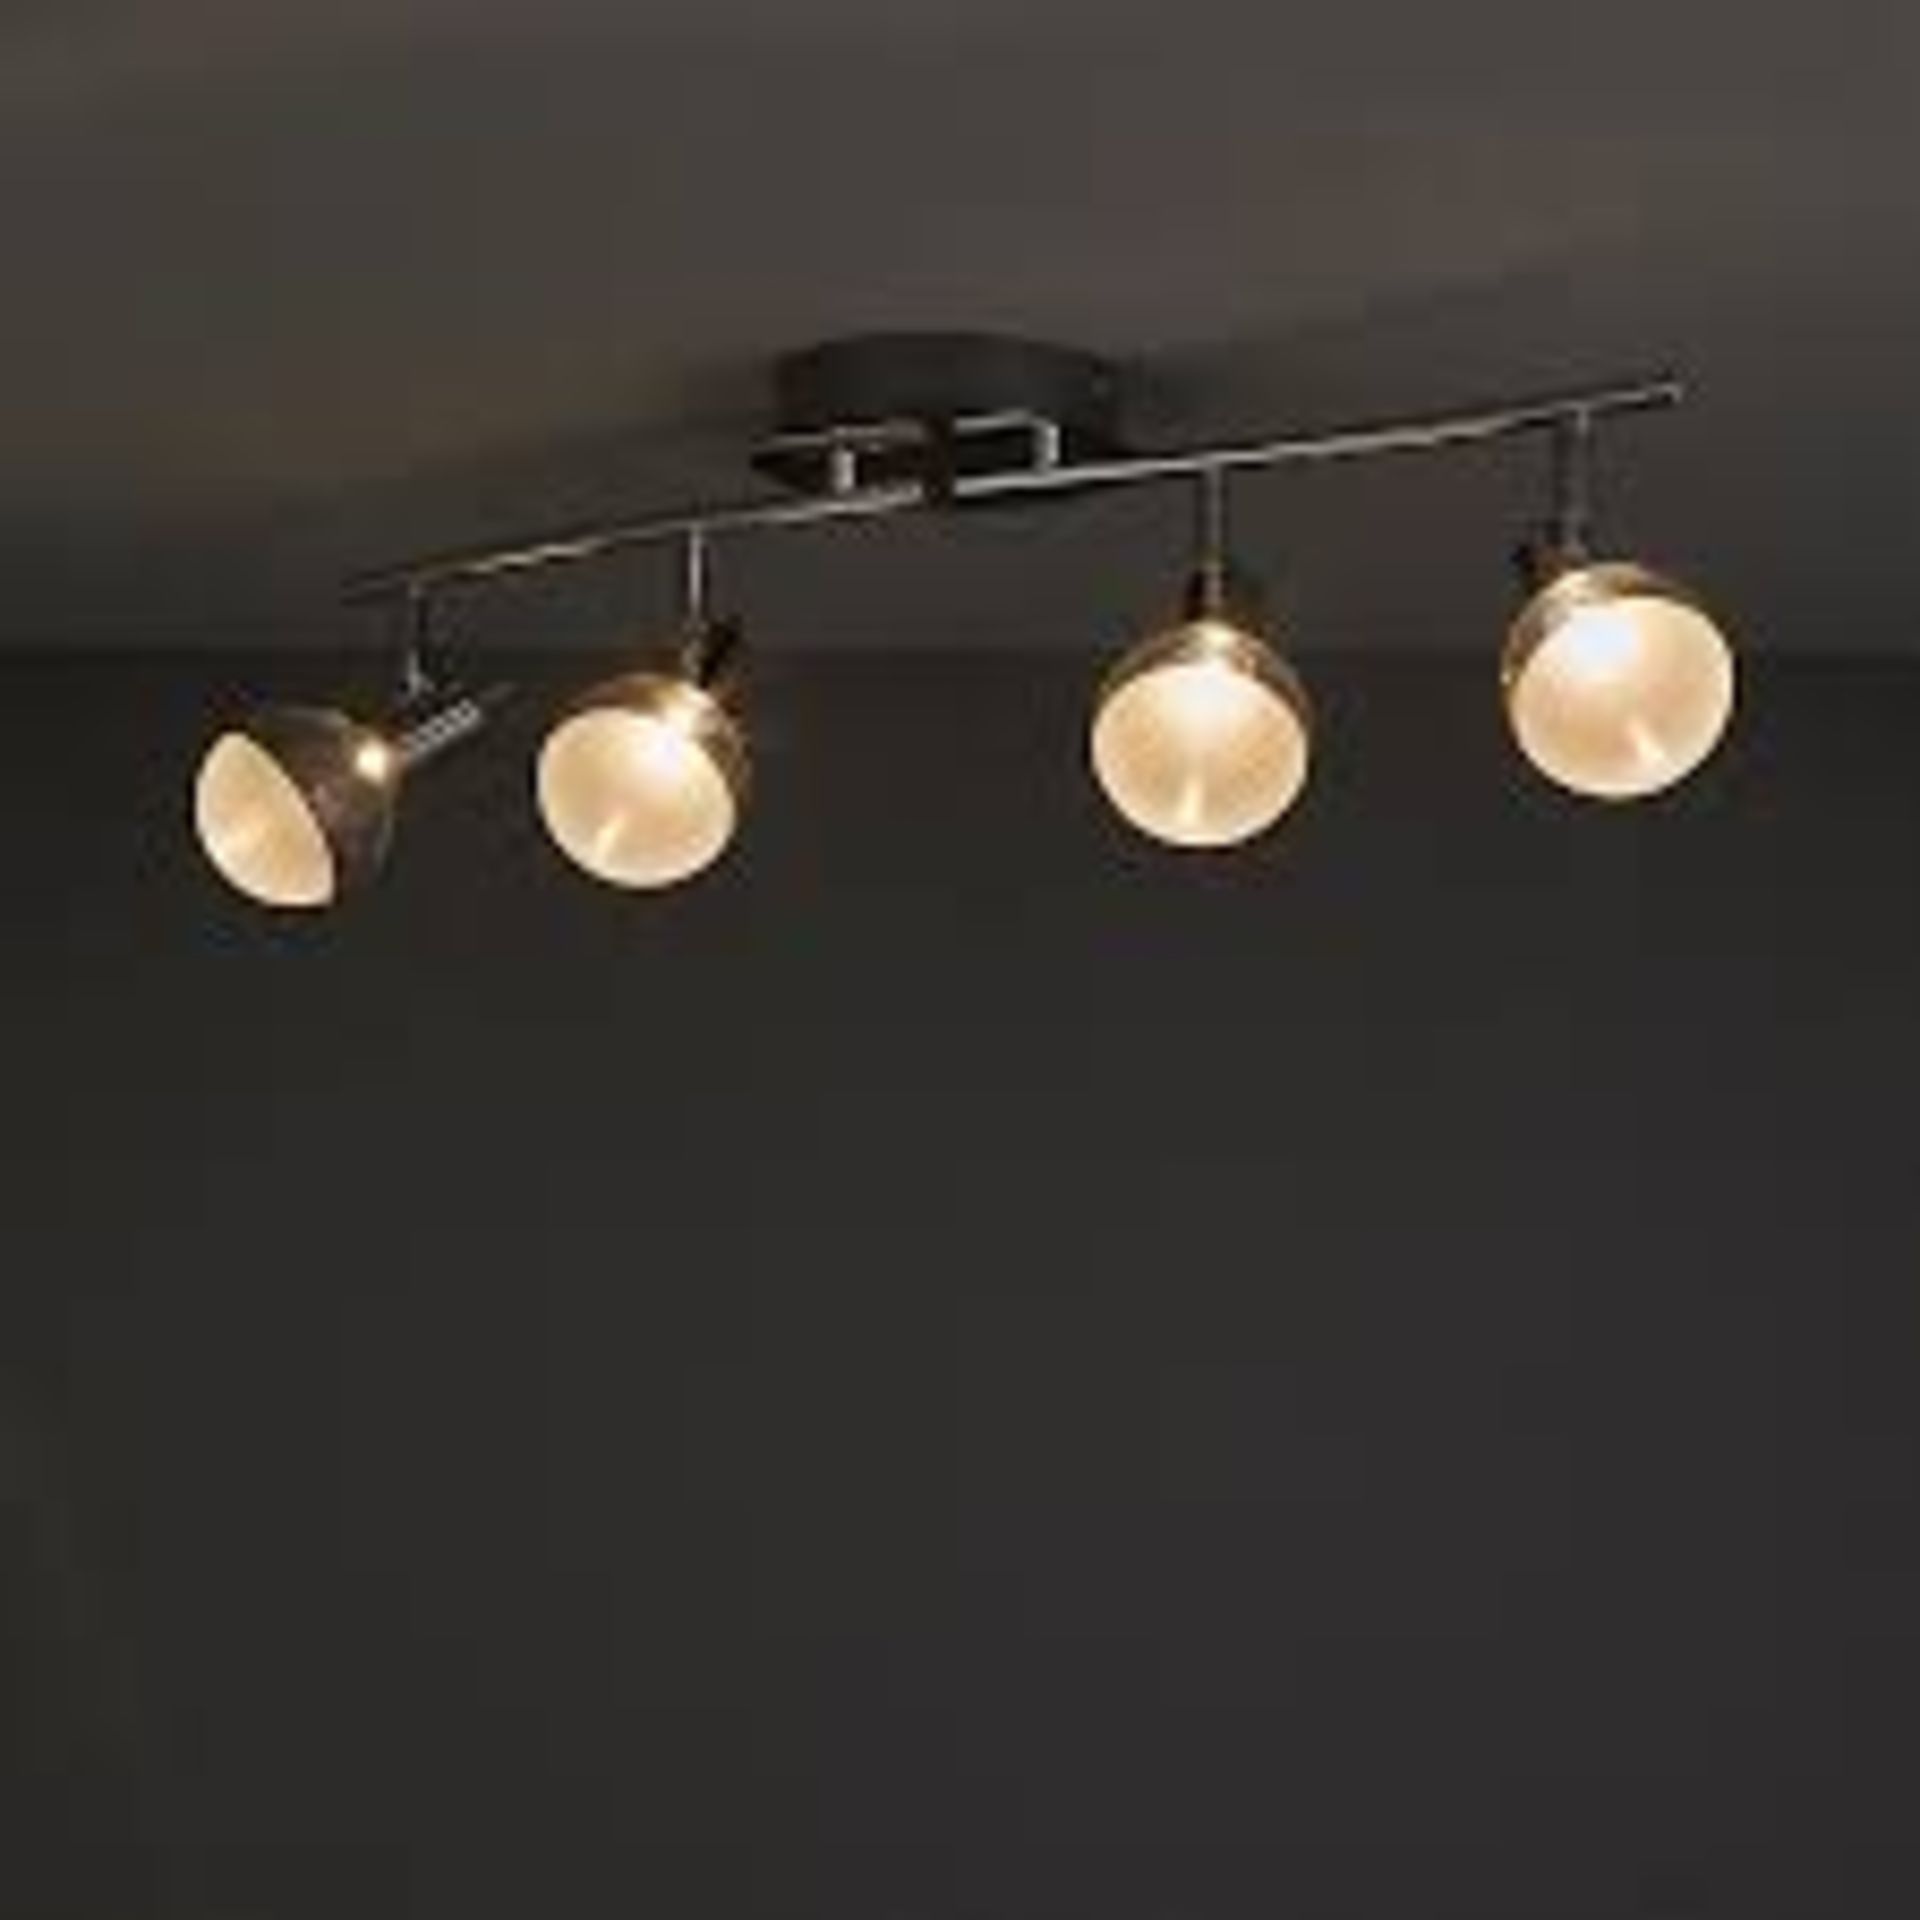 Panacea Chrome effect 4 Light Spotlight. - PW. This mains powered spot light features 4 lamps and